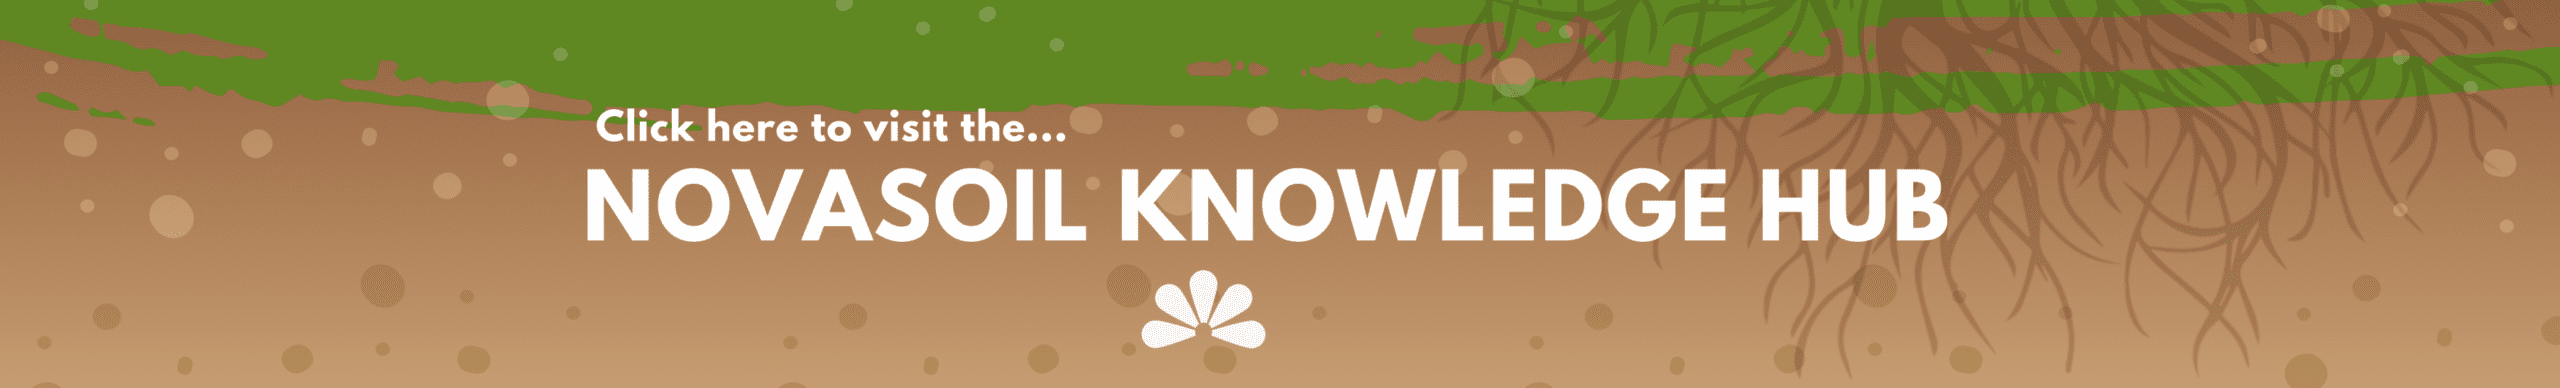 Welcome to NOVASOIL knowledge hub - the ultimate online community for agriculture enthusiasts who want to improve soil health. Whether you are a farmer, or simply interested in the latest developments in sustainable farming practices, based on implementation of soil health business models, this is the place for you.